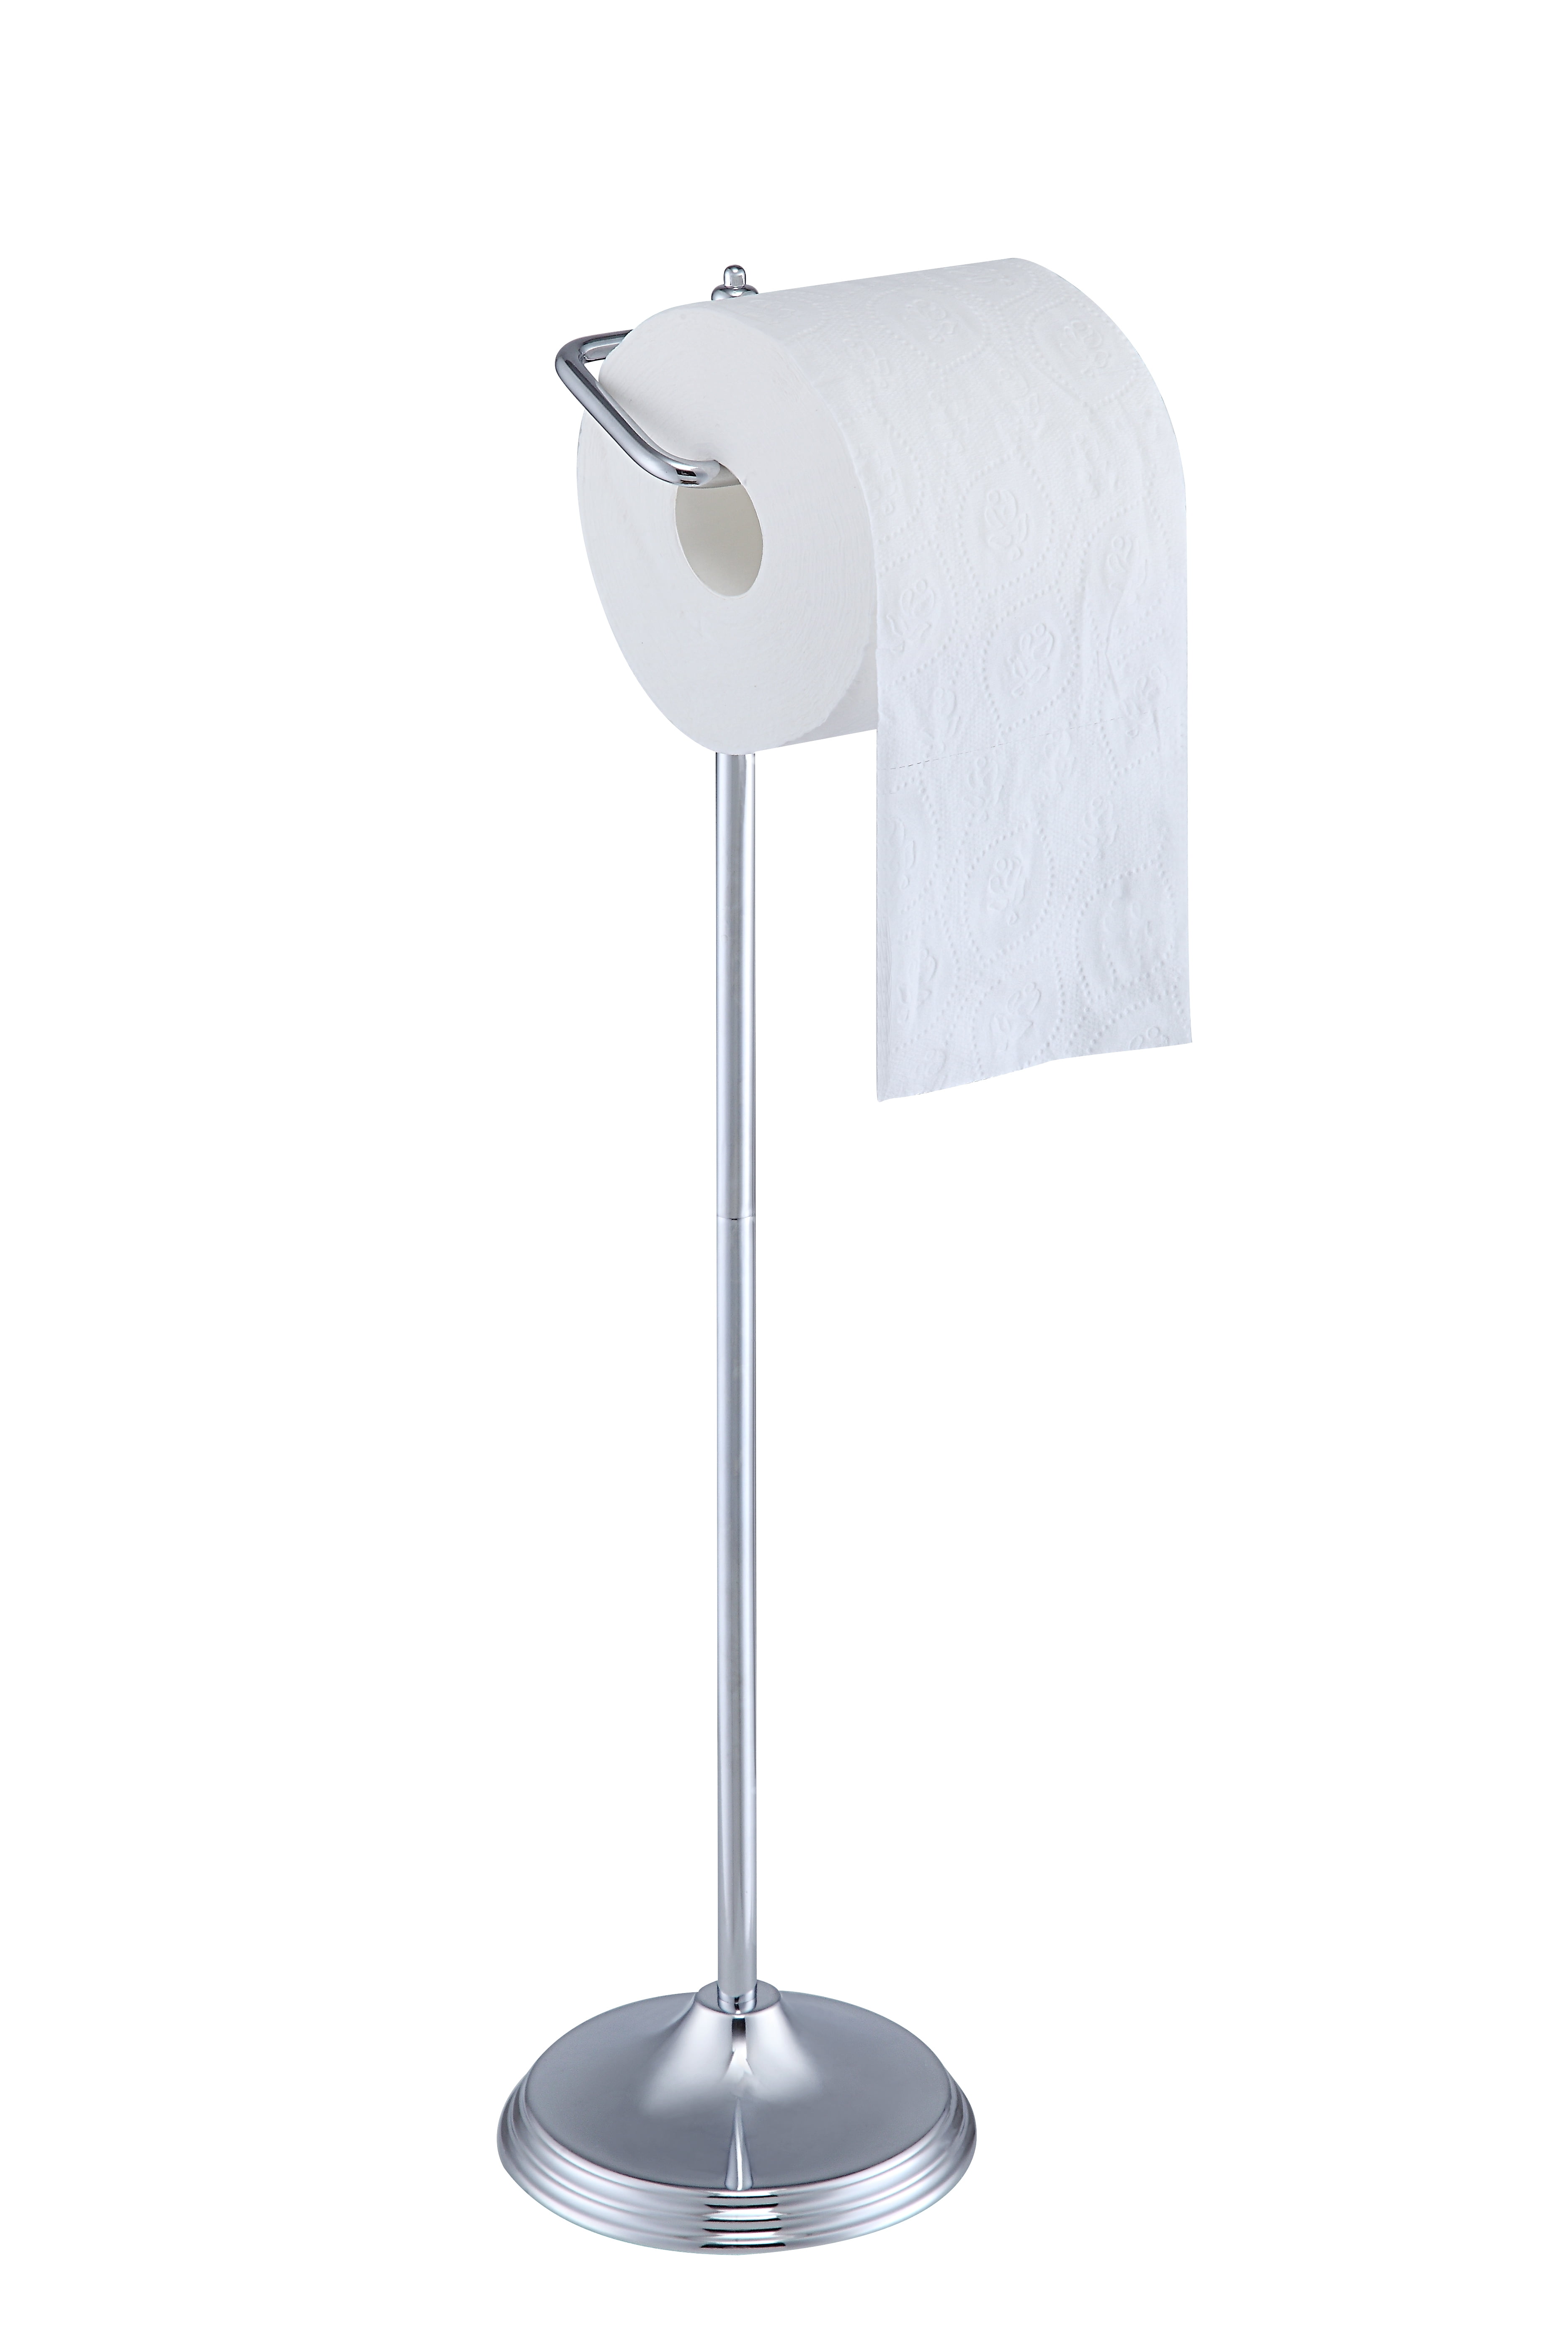 Sunnypoint Classic Bathroom Free Standing Toilet Tissue Paper Roll Holder Stand, 